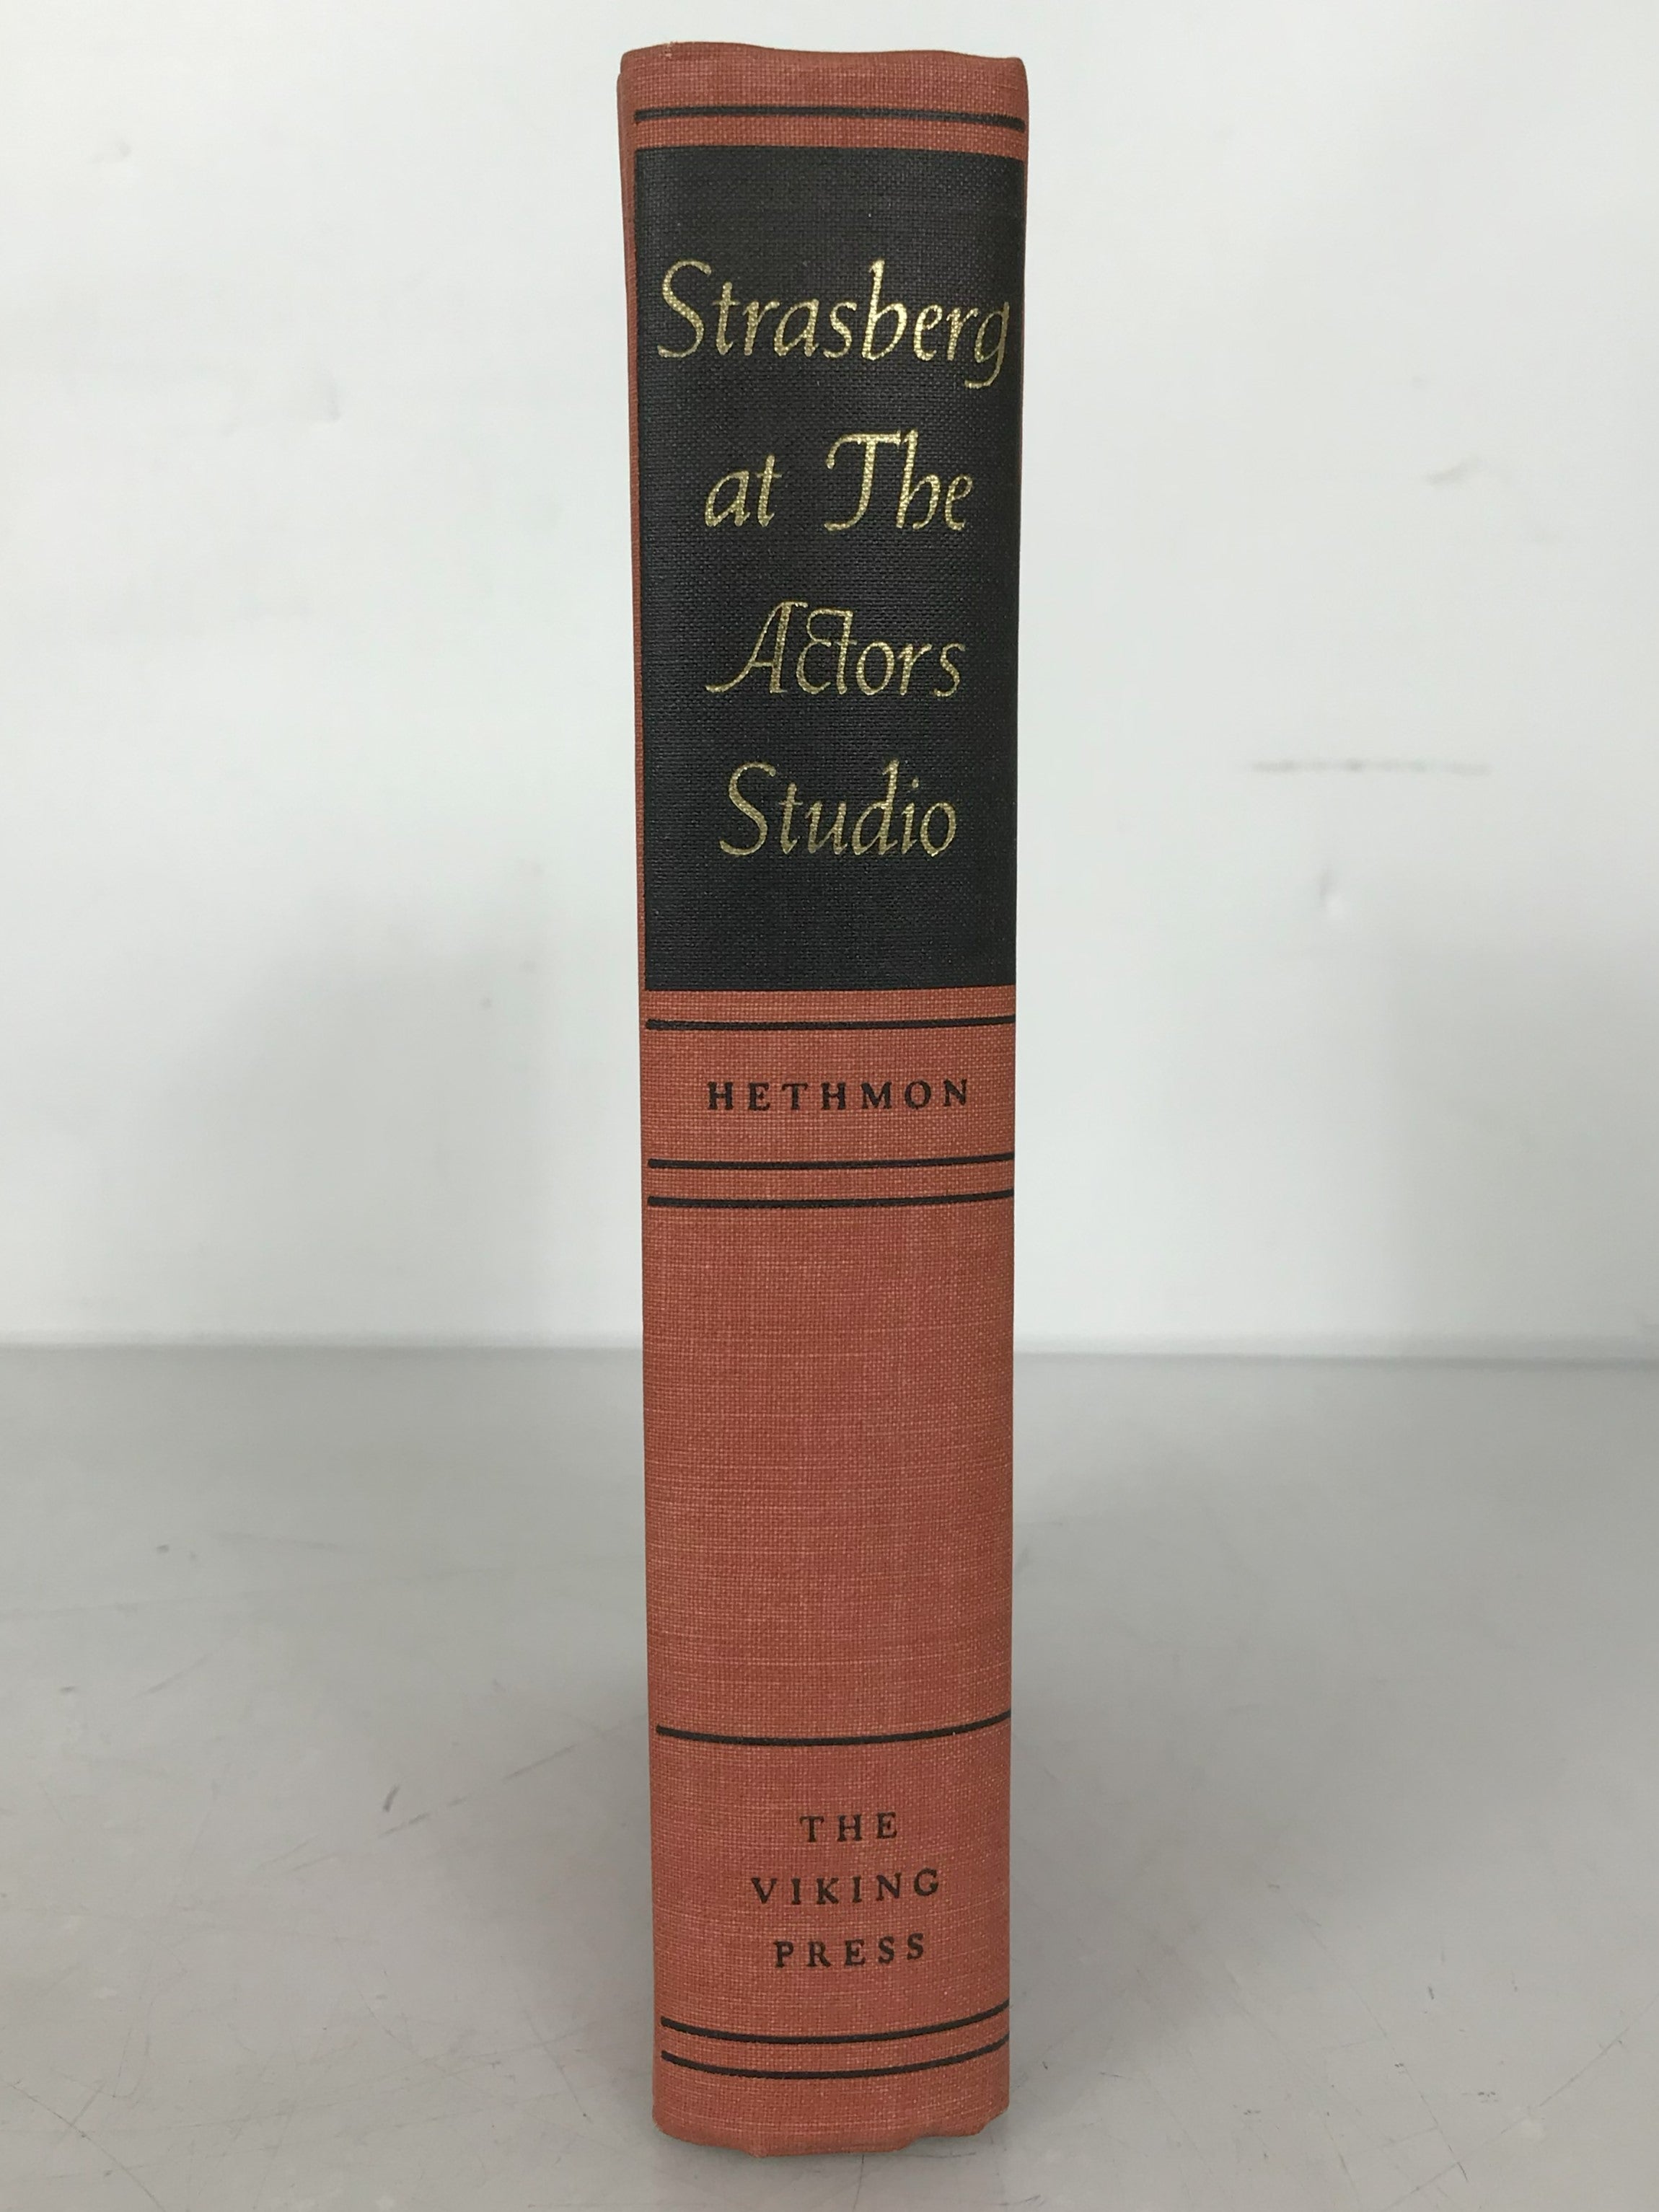 Strasberg At the Actors Studio Tape-Recorded Sessions Edited by Robert Hethmon First Edition Review Copy 1965 HC DJ